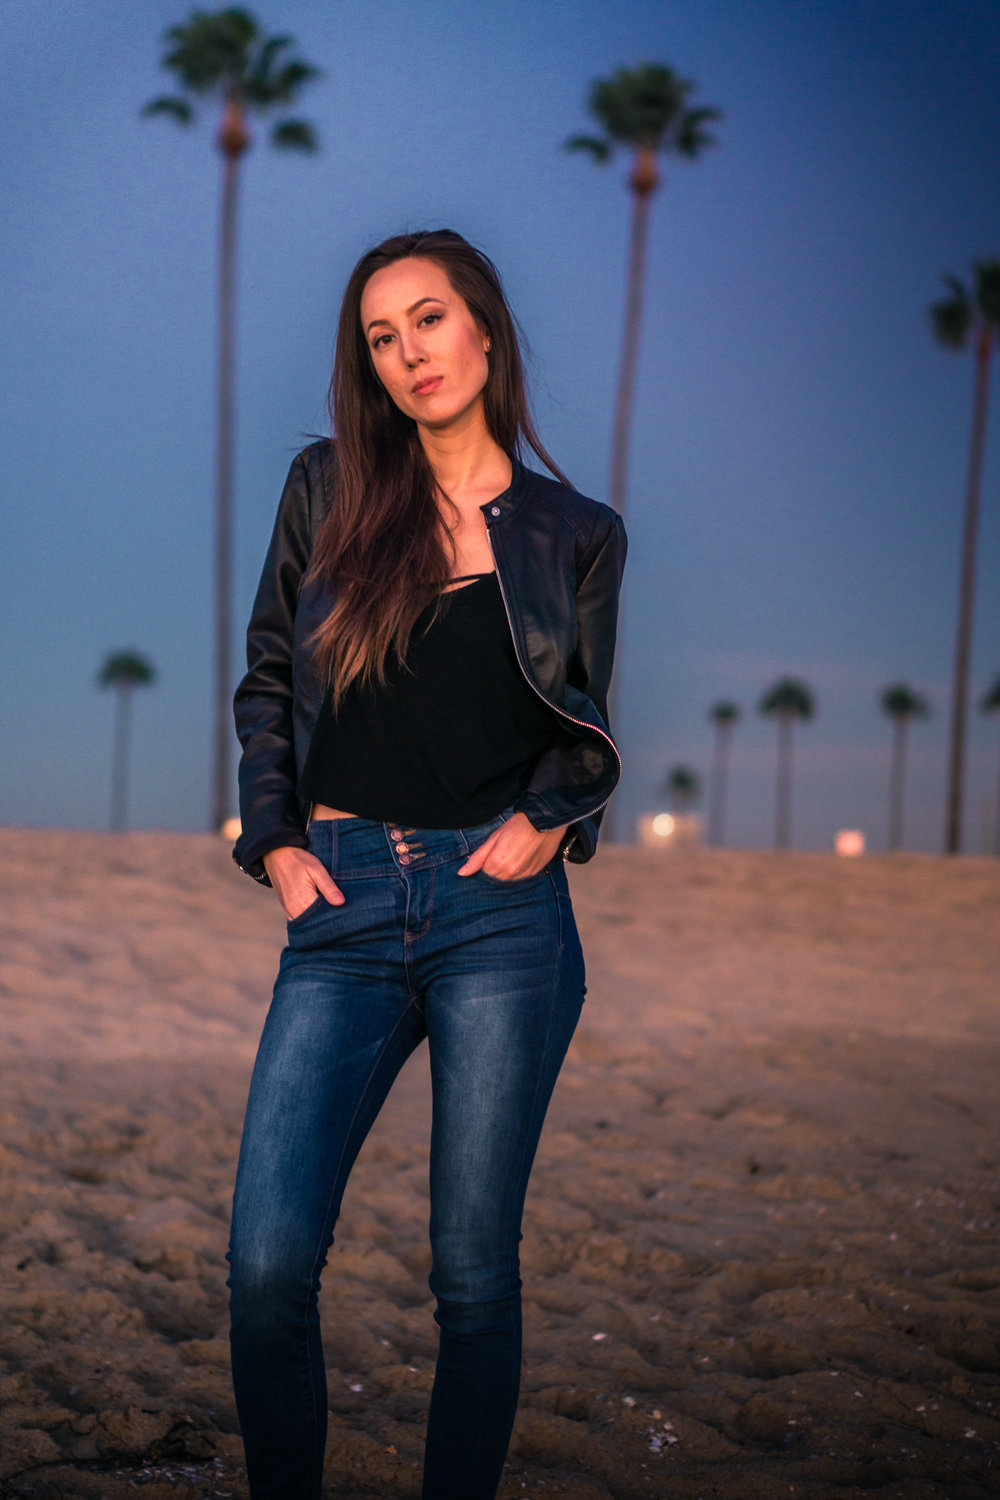 Natural light Fashion photoshoot of model posing in black leather jacket and blue jeans with blue sky and palm trees during Golden hour At Balboa Pier in Newport Beach